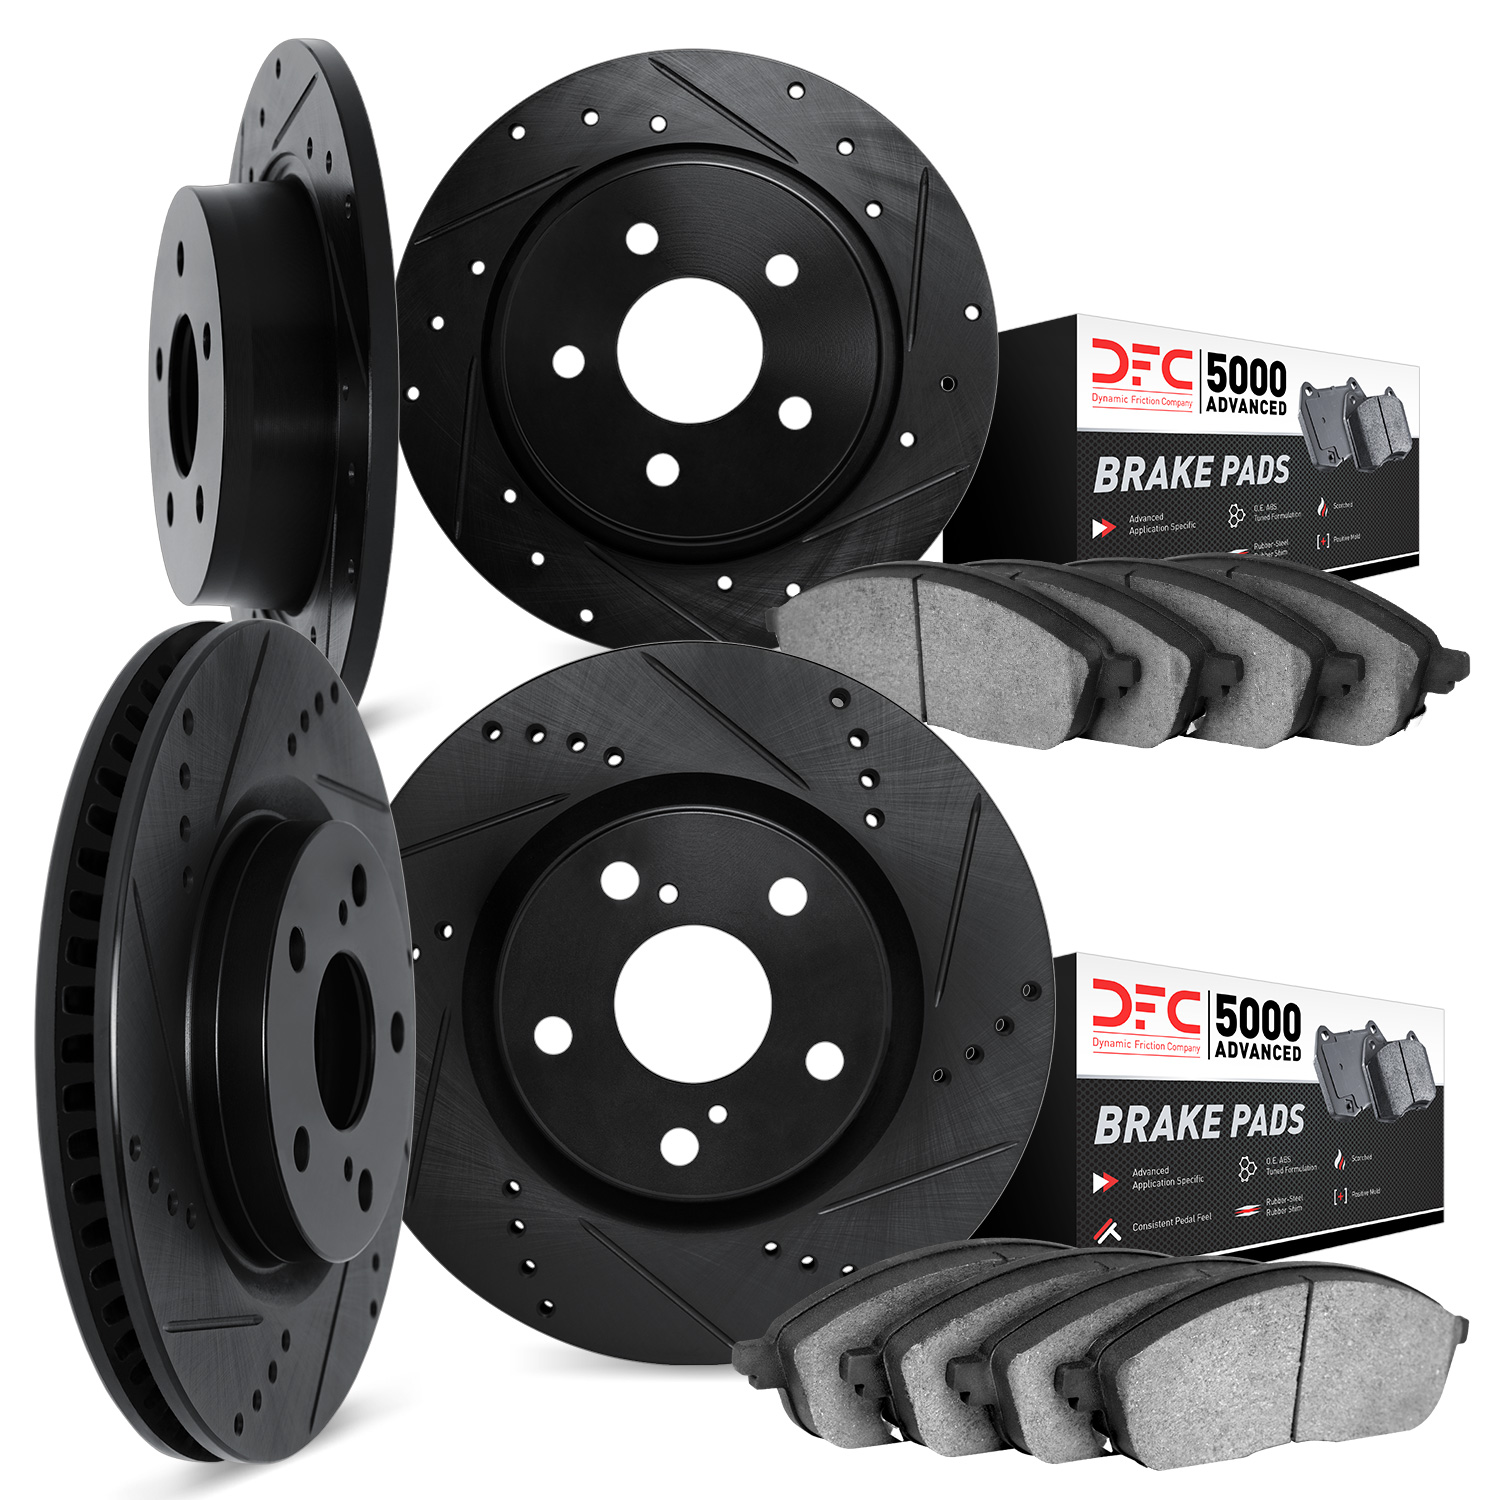 8504-59054 Drilled/Slotted Brake Rotors w/5000 Advanced Brake Pads Kit [Black], 2020-2021 Acura/Honda, Position: Front and Rear